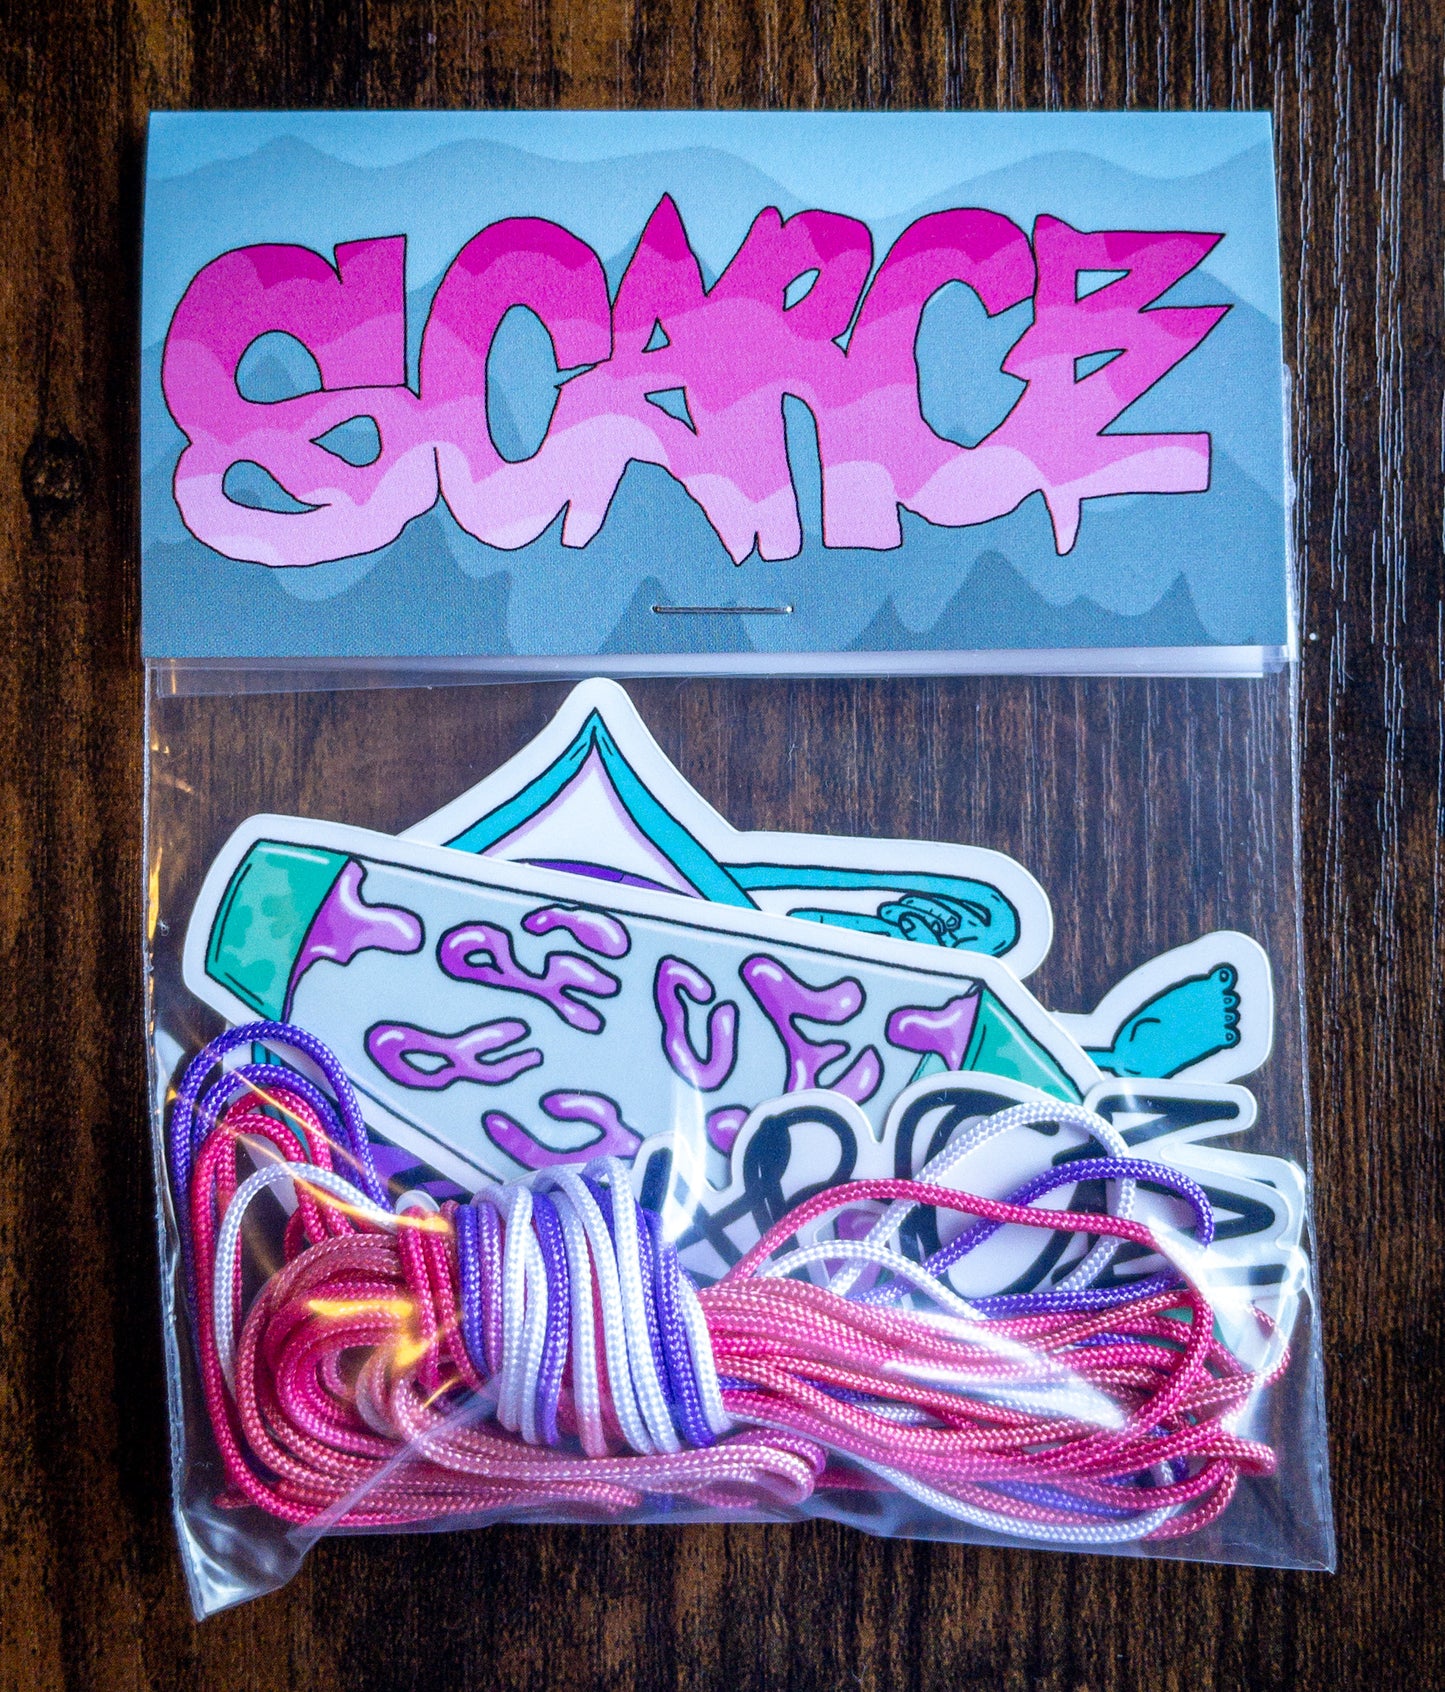 Scarce String 6 Pack (Pink/ Purple Fade)